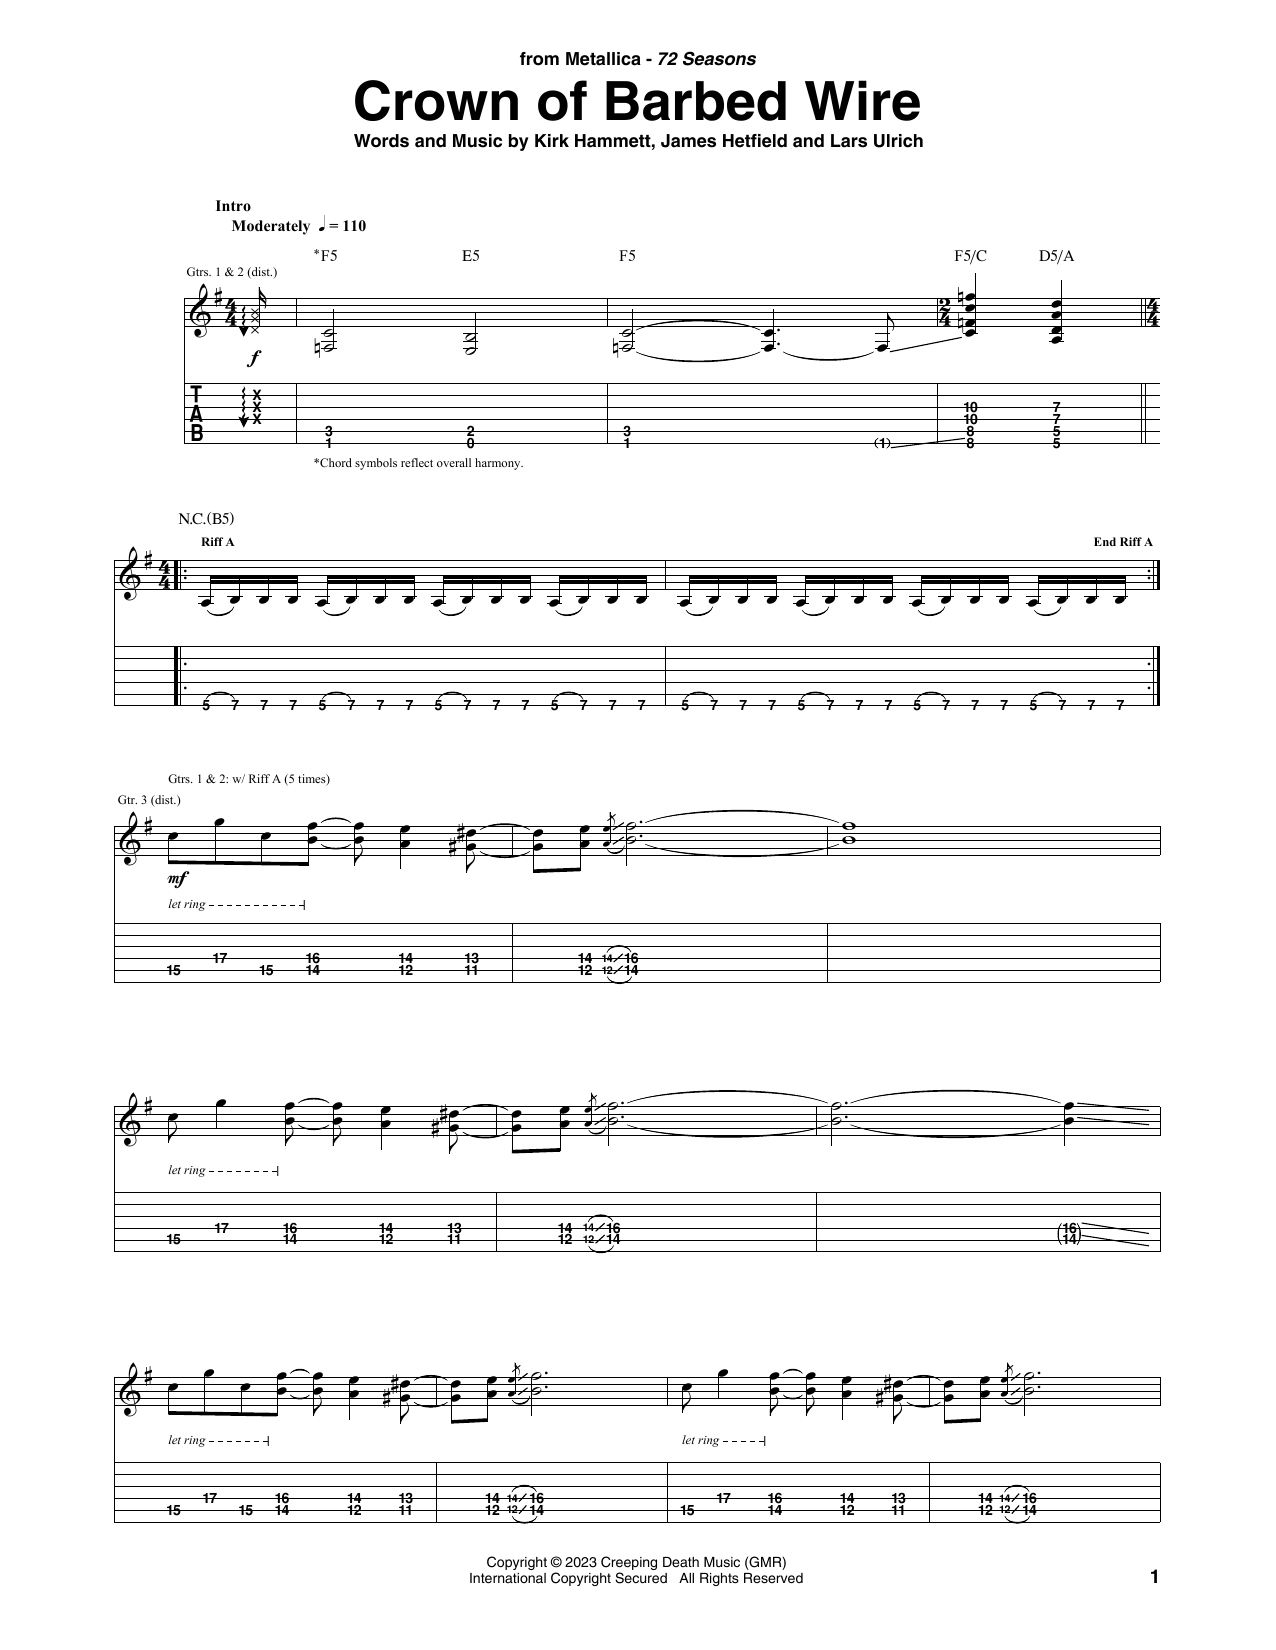 Download Metallica Crown Of Barbed Wire Sheet Music